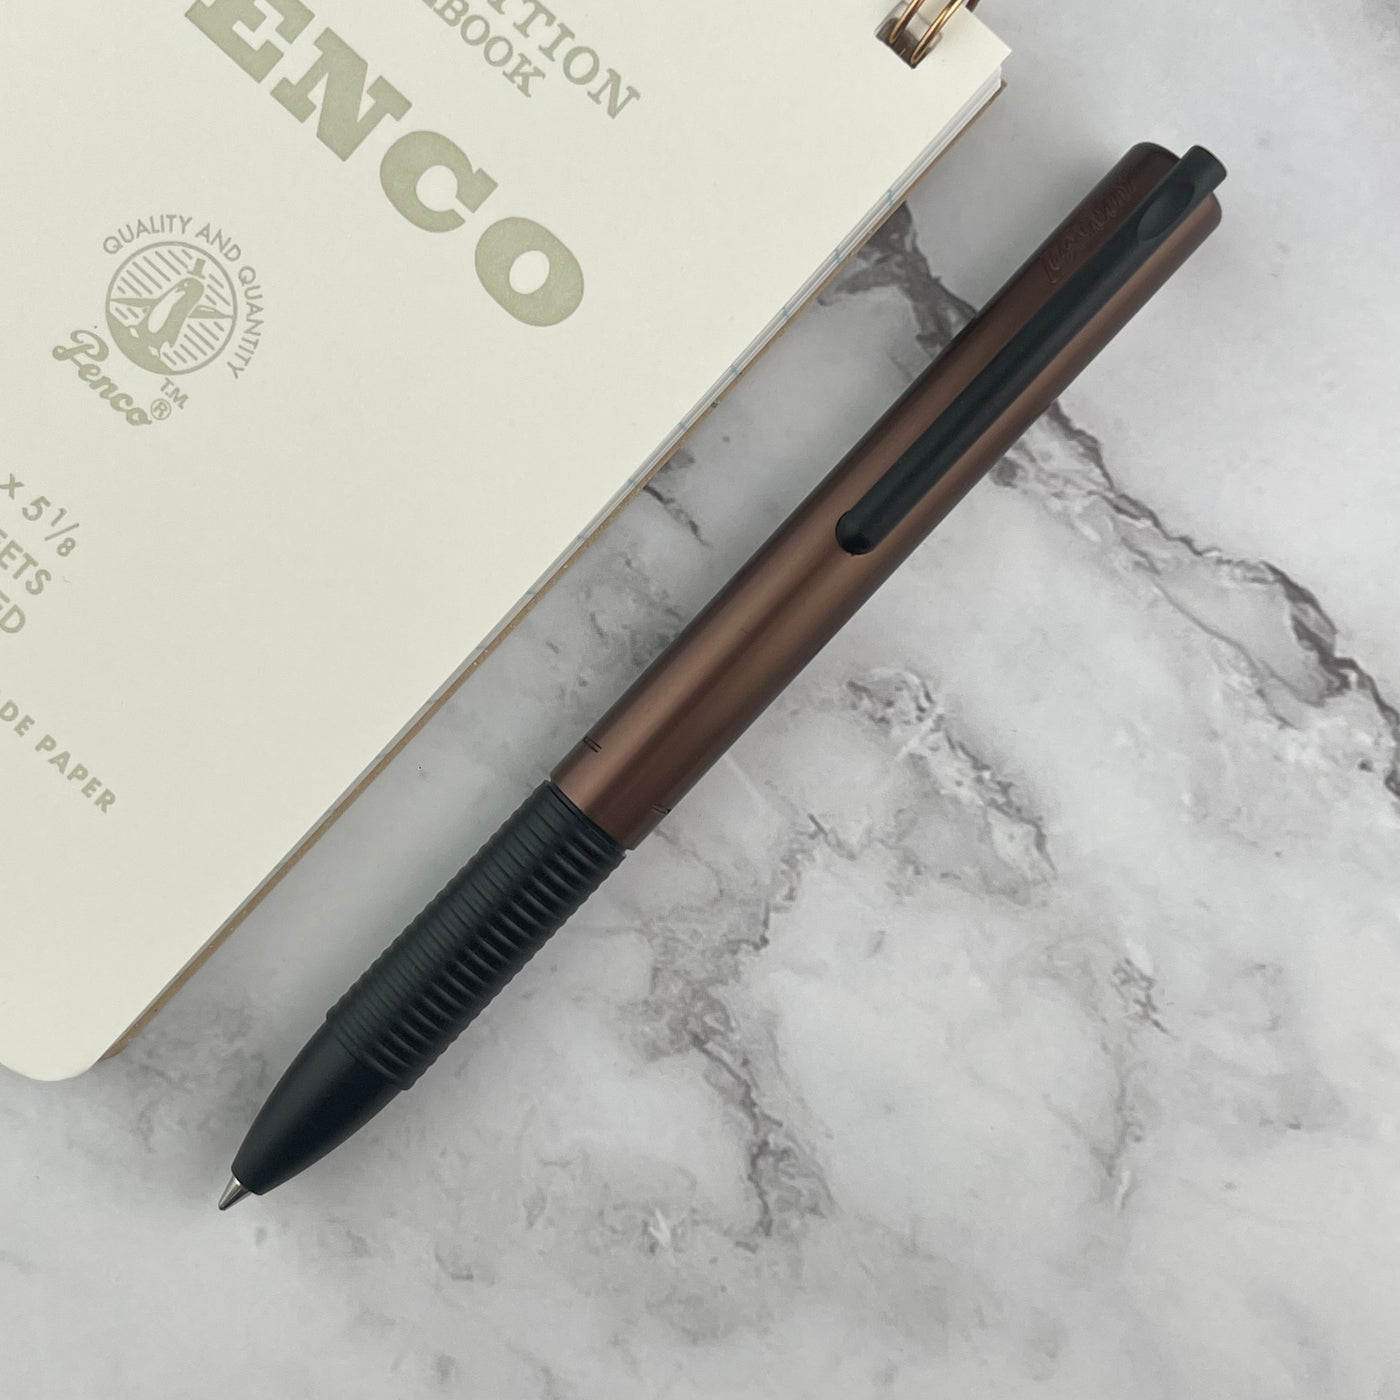 Lamy Tipo Rollerball Pen - Coffee